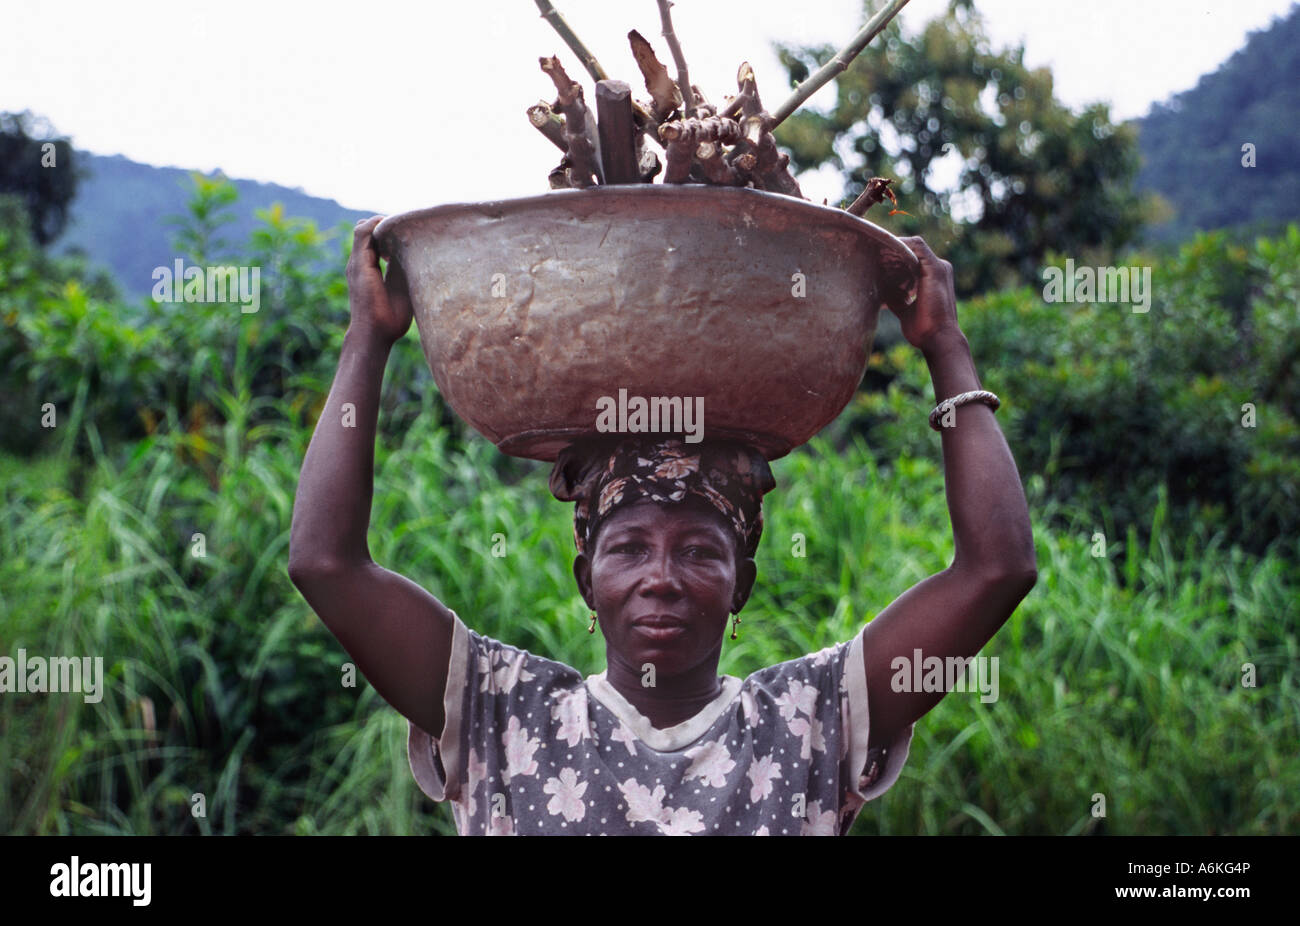 Woman in Volta Region, Ghana on her way to work picking maize on a smallholder farm Stock Photo